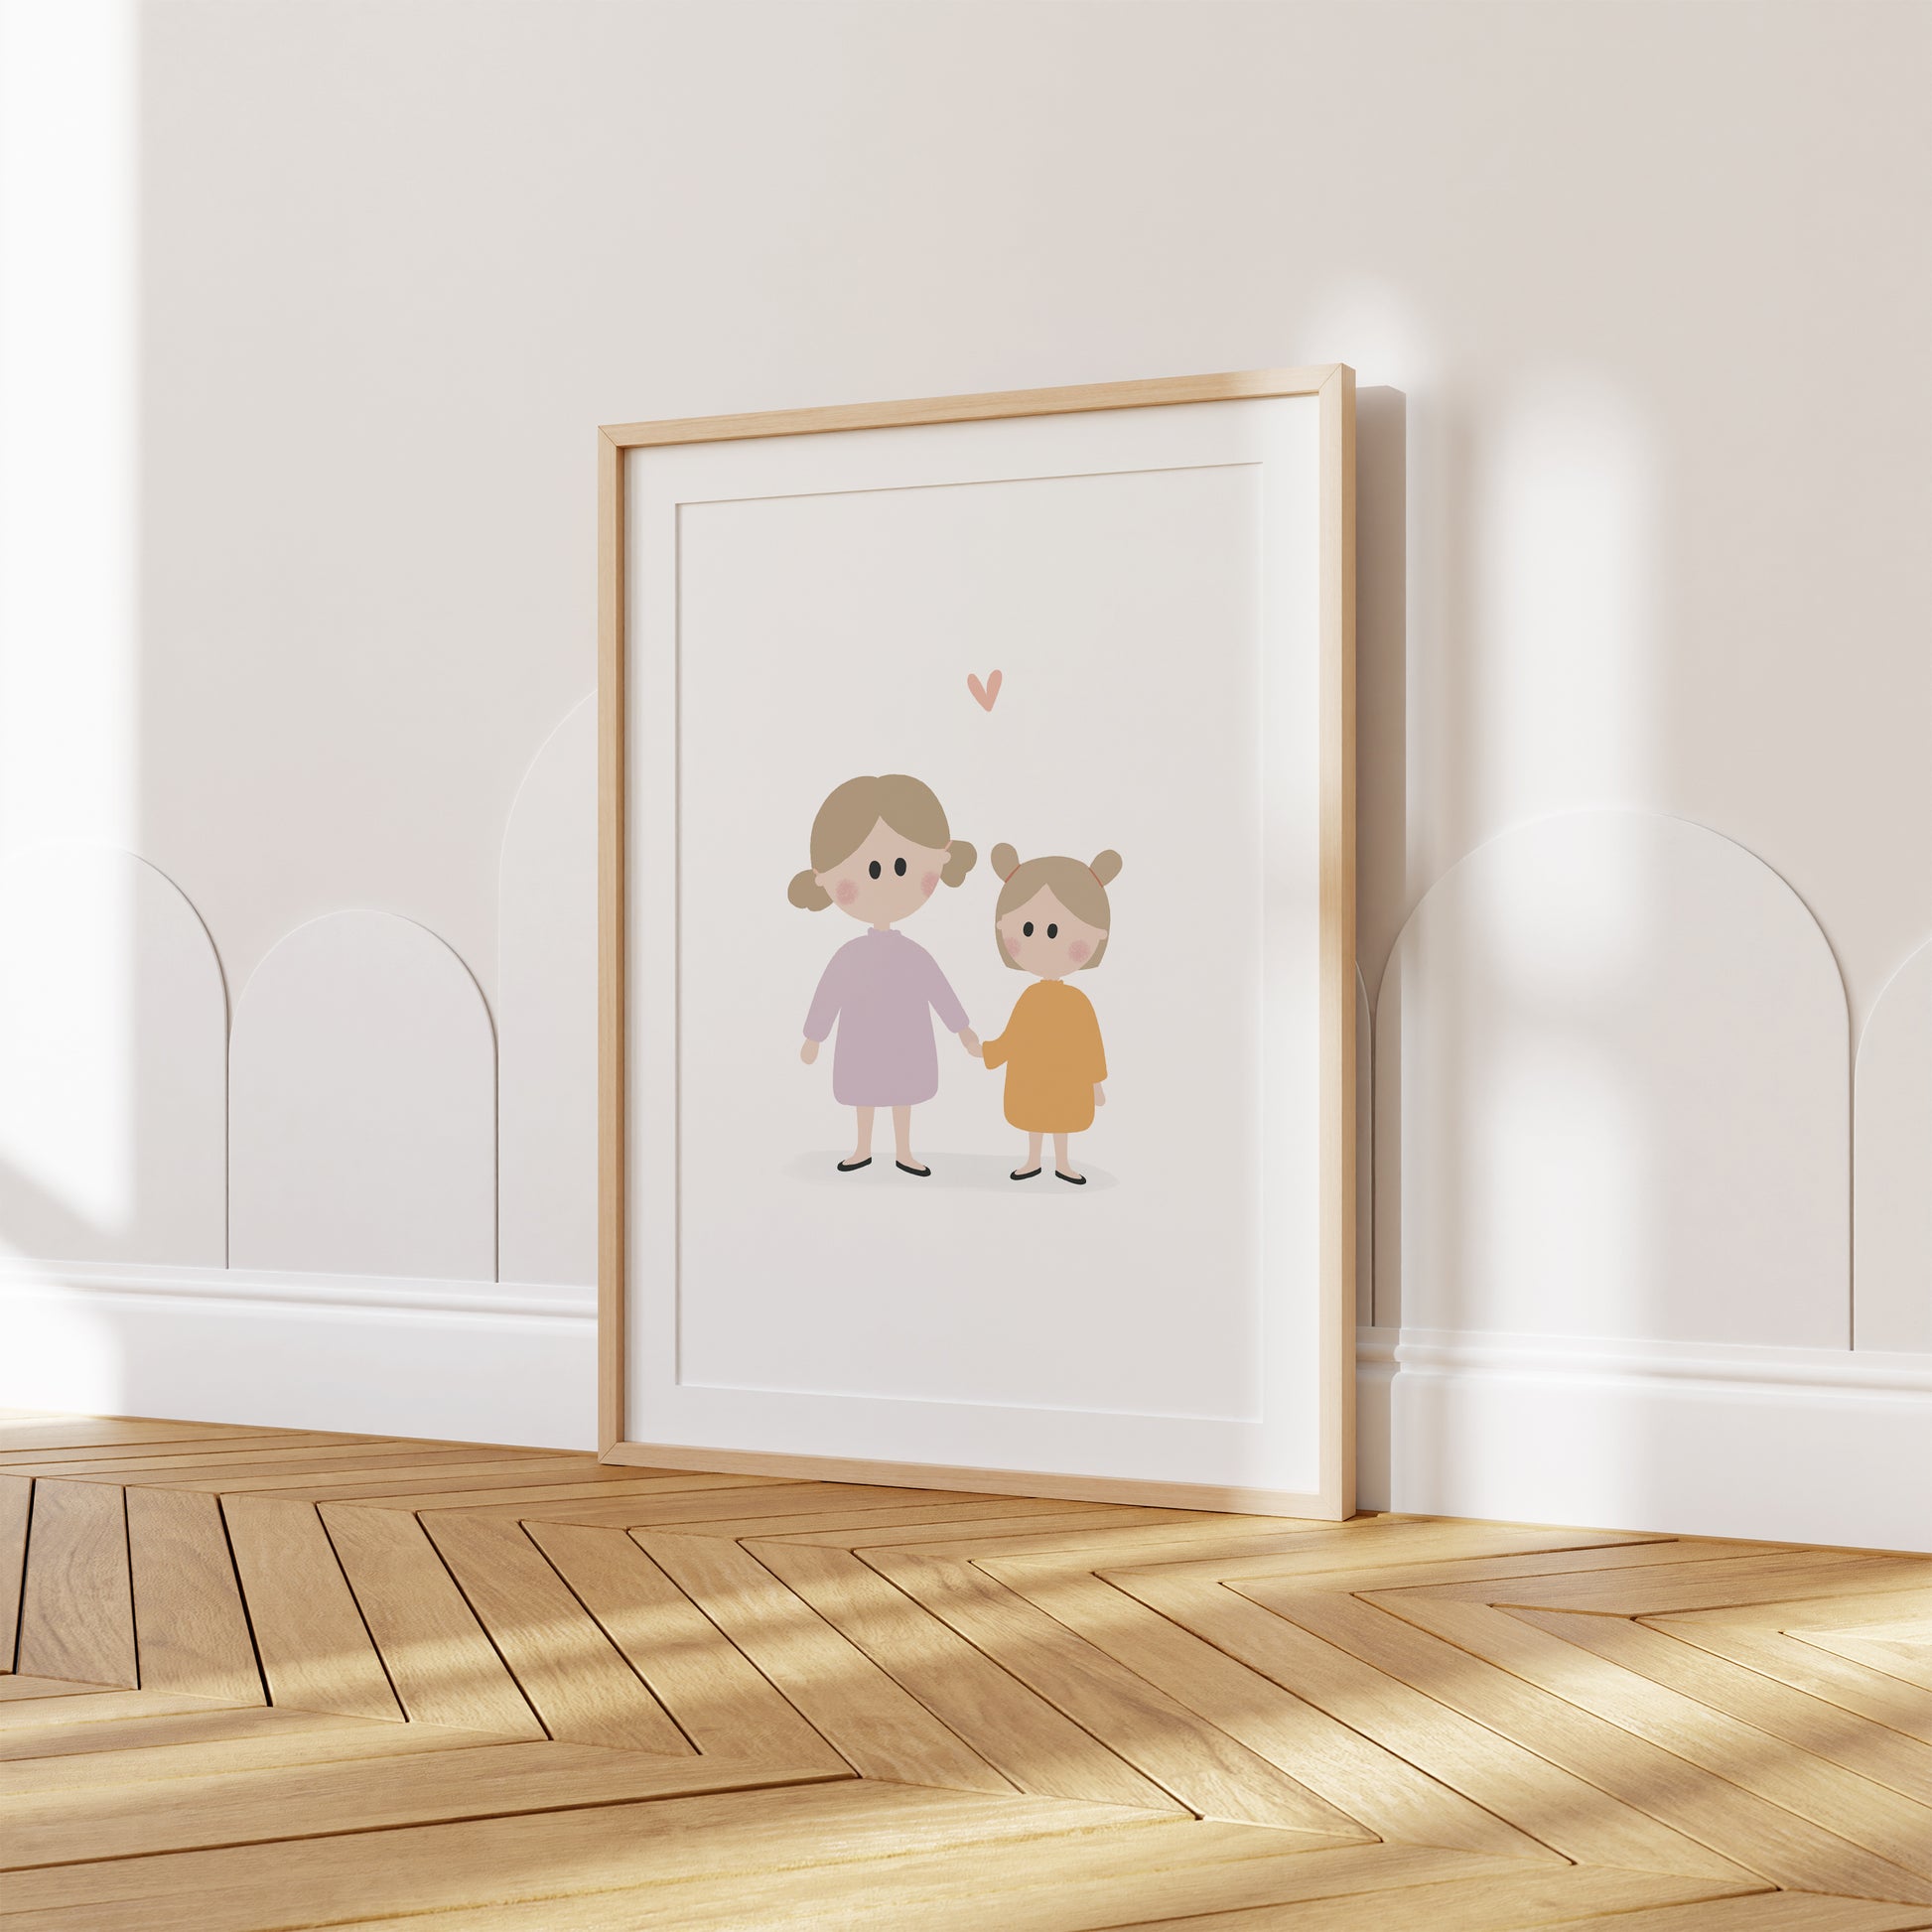 A beautifully illustrated art print featuring little sisters. This poster certainly brings joy and tenderness to your walls with soft pastel colors.